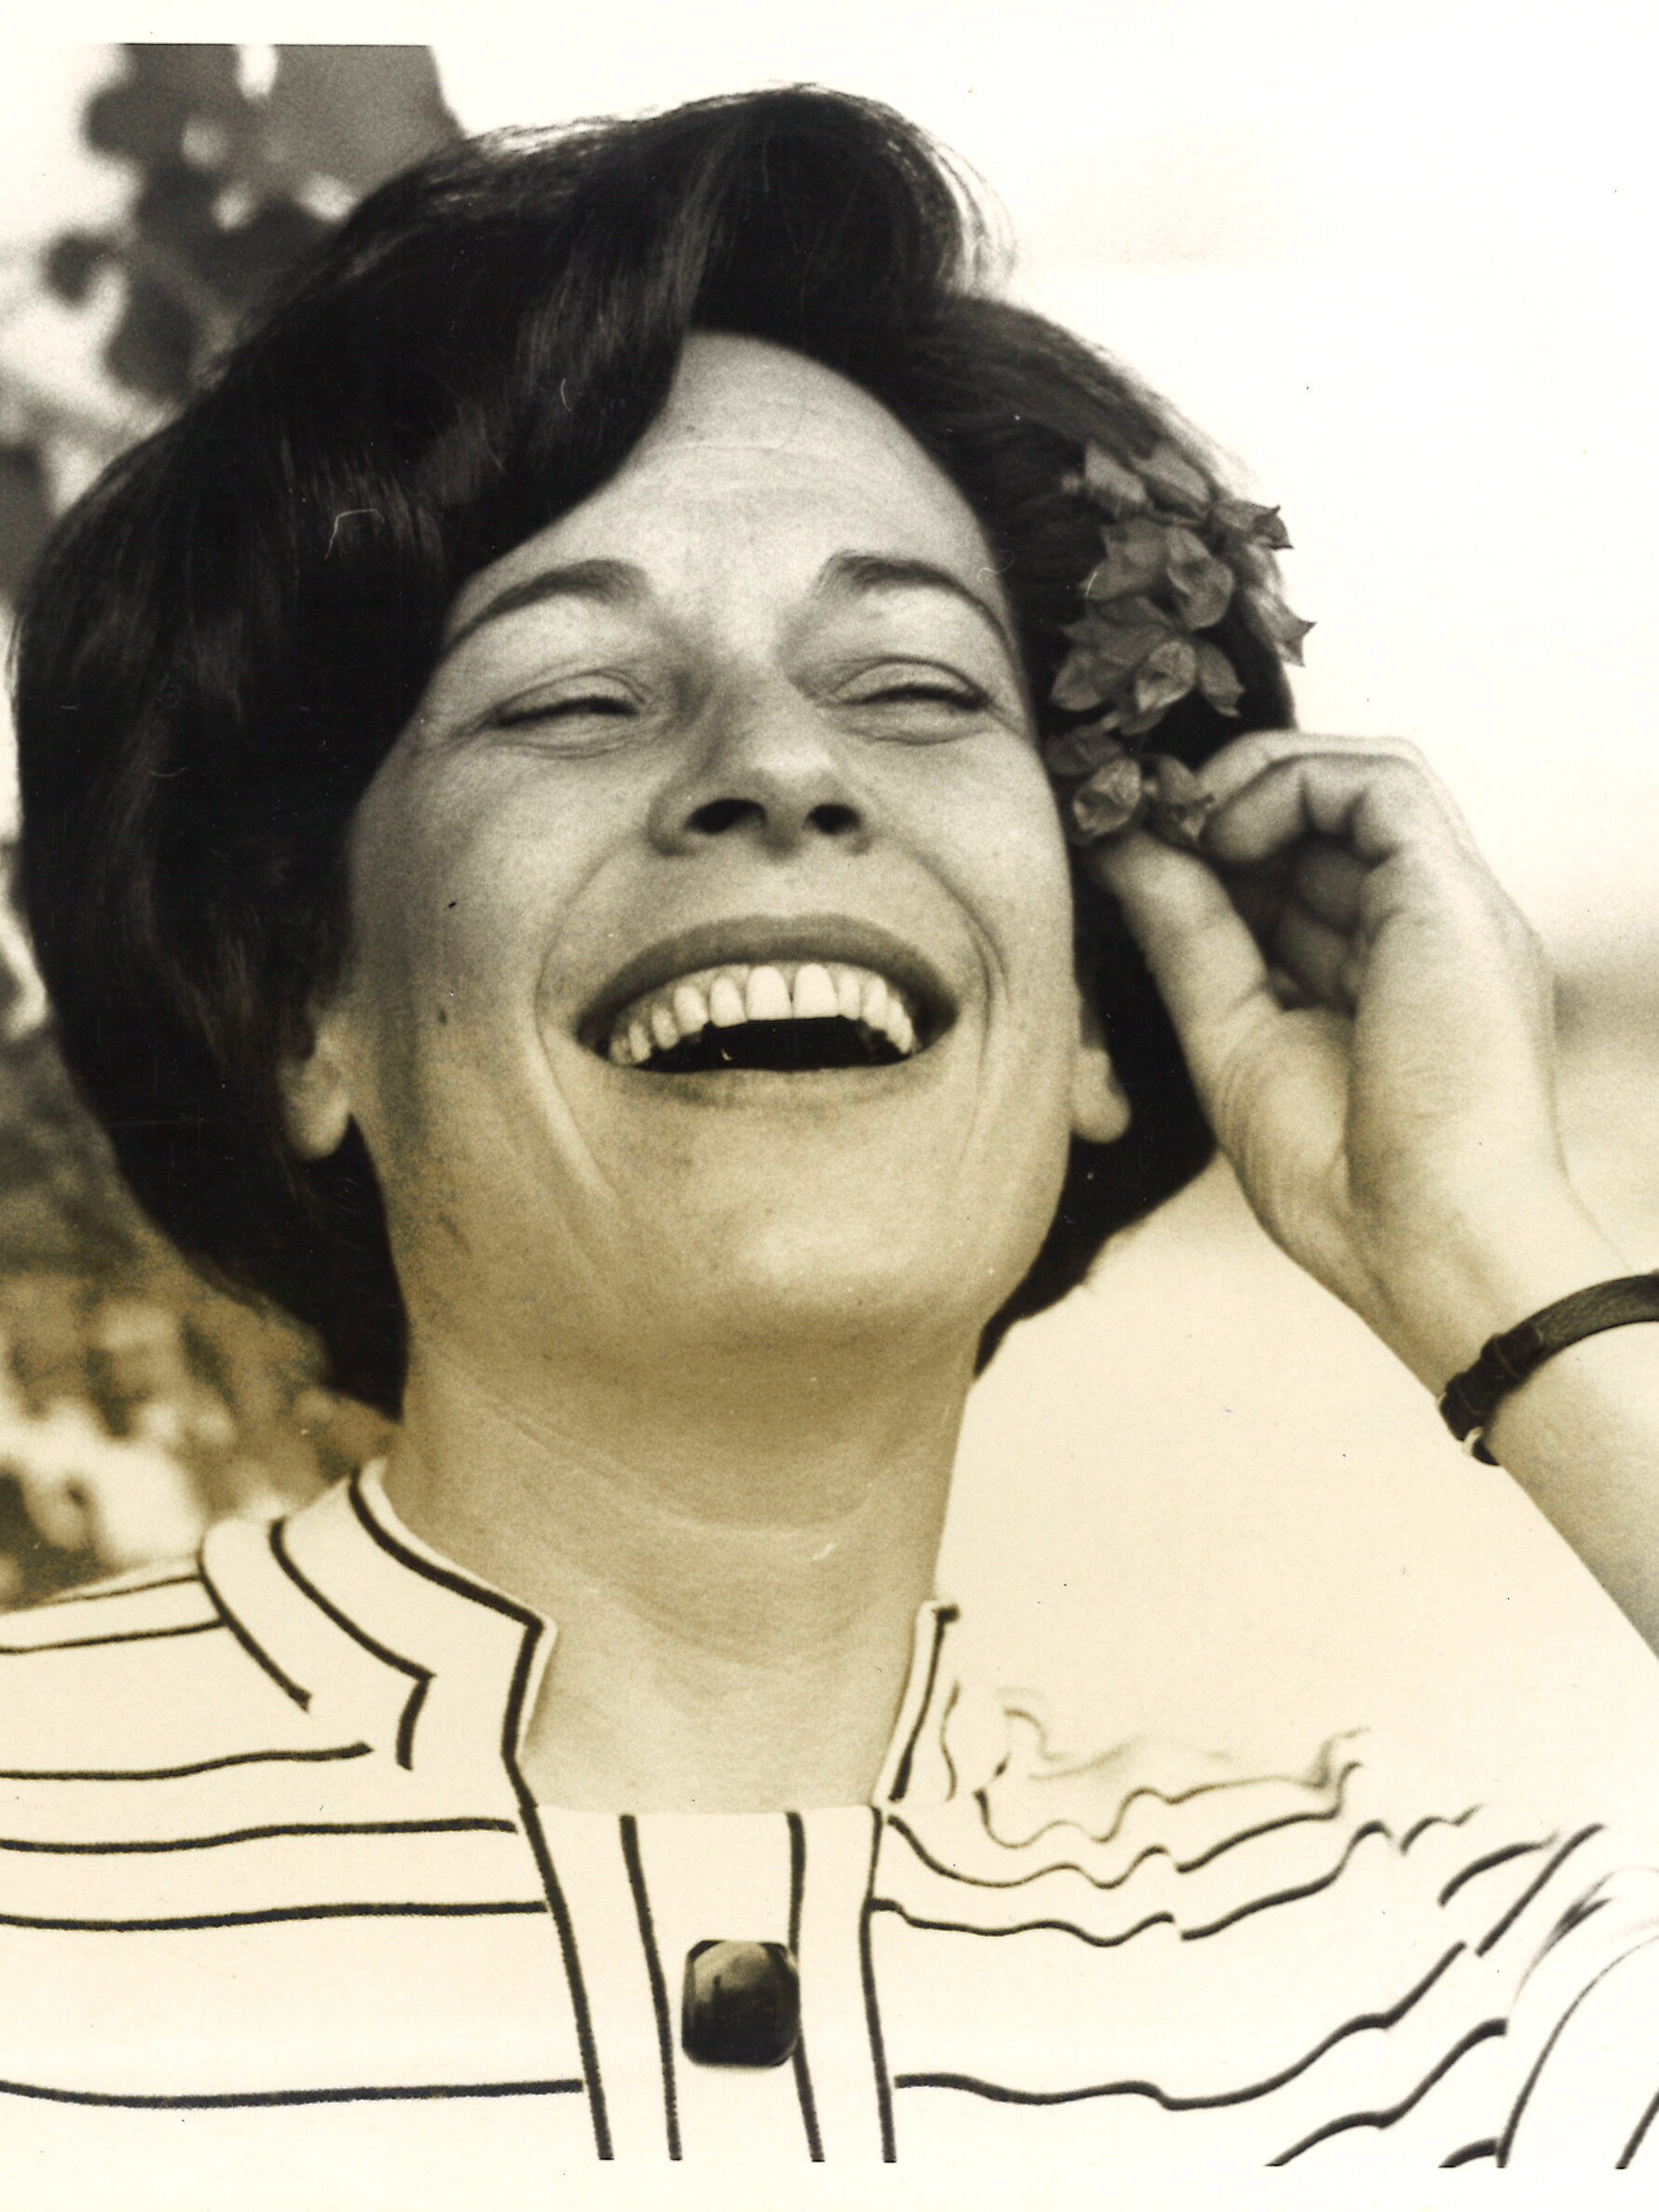 A woman in a striped shirt smiles with flowers in her hair.